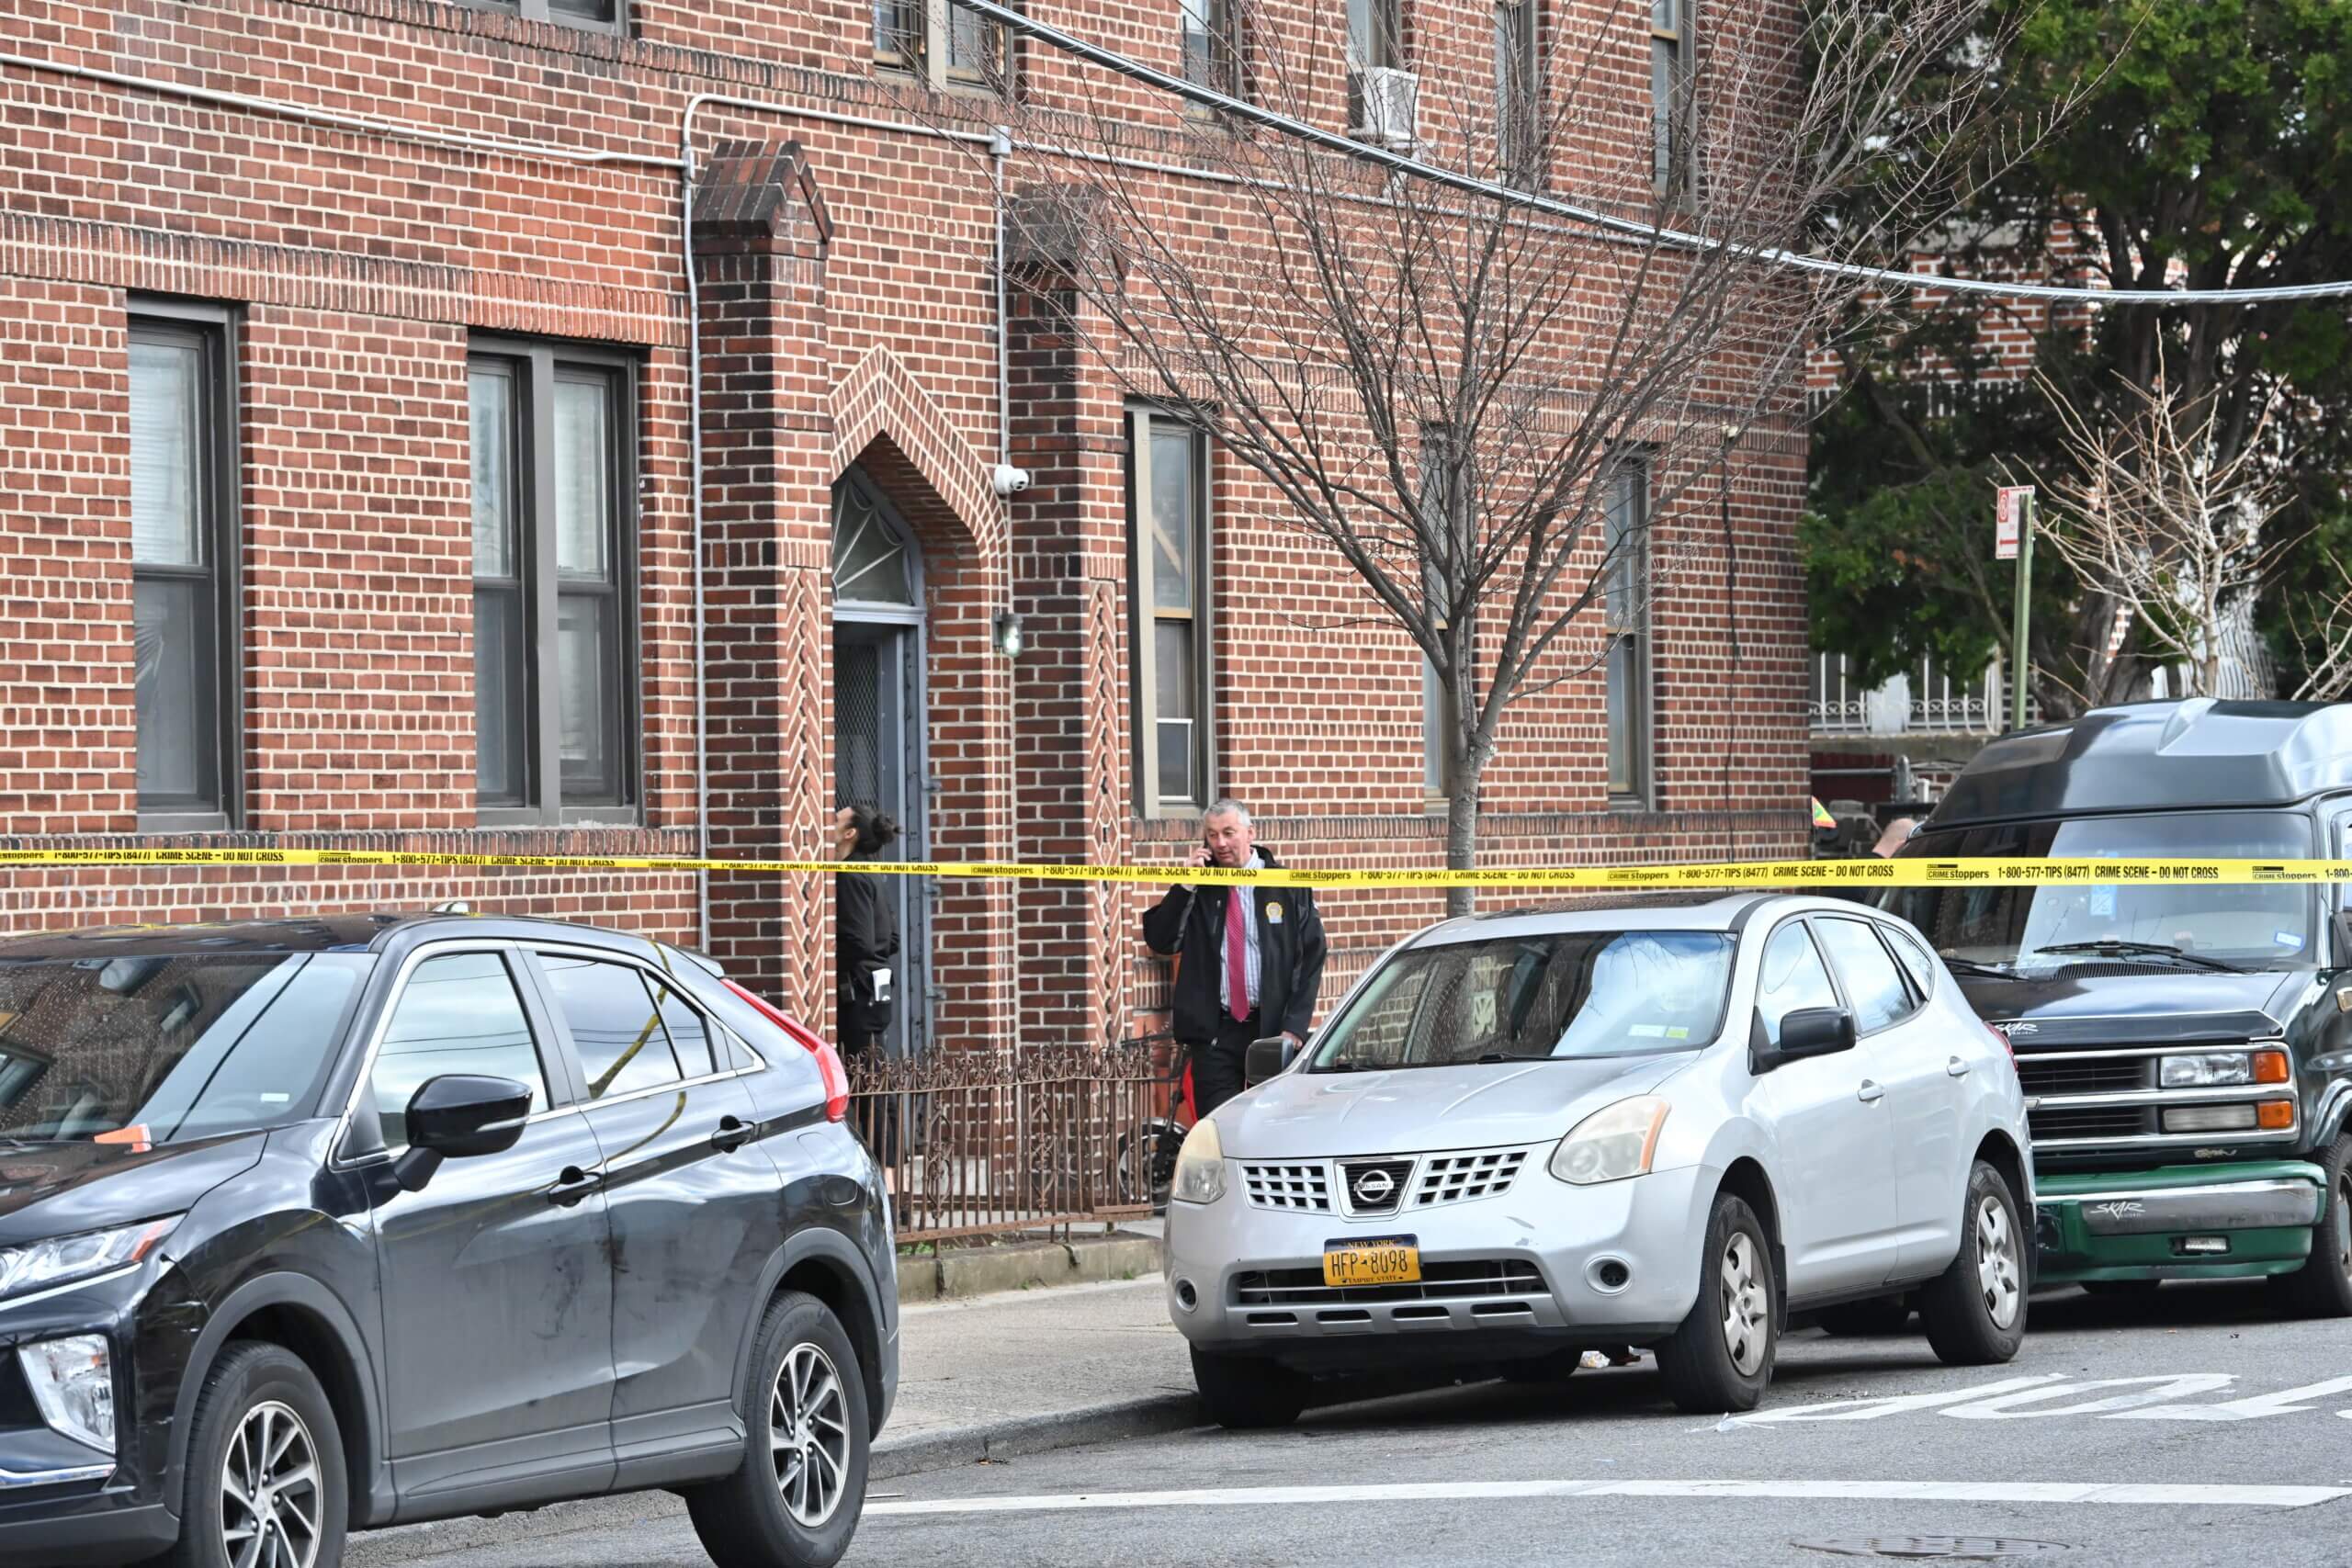 The shooting occurred just a half a block from Holy Cross Cemetery in broad daylight. 